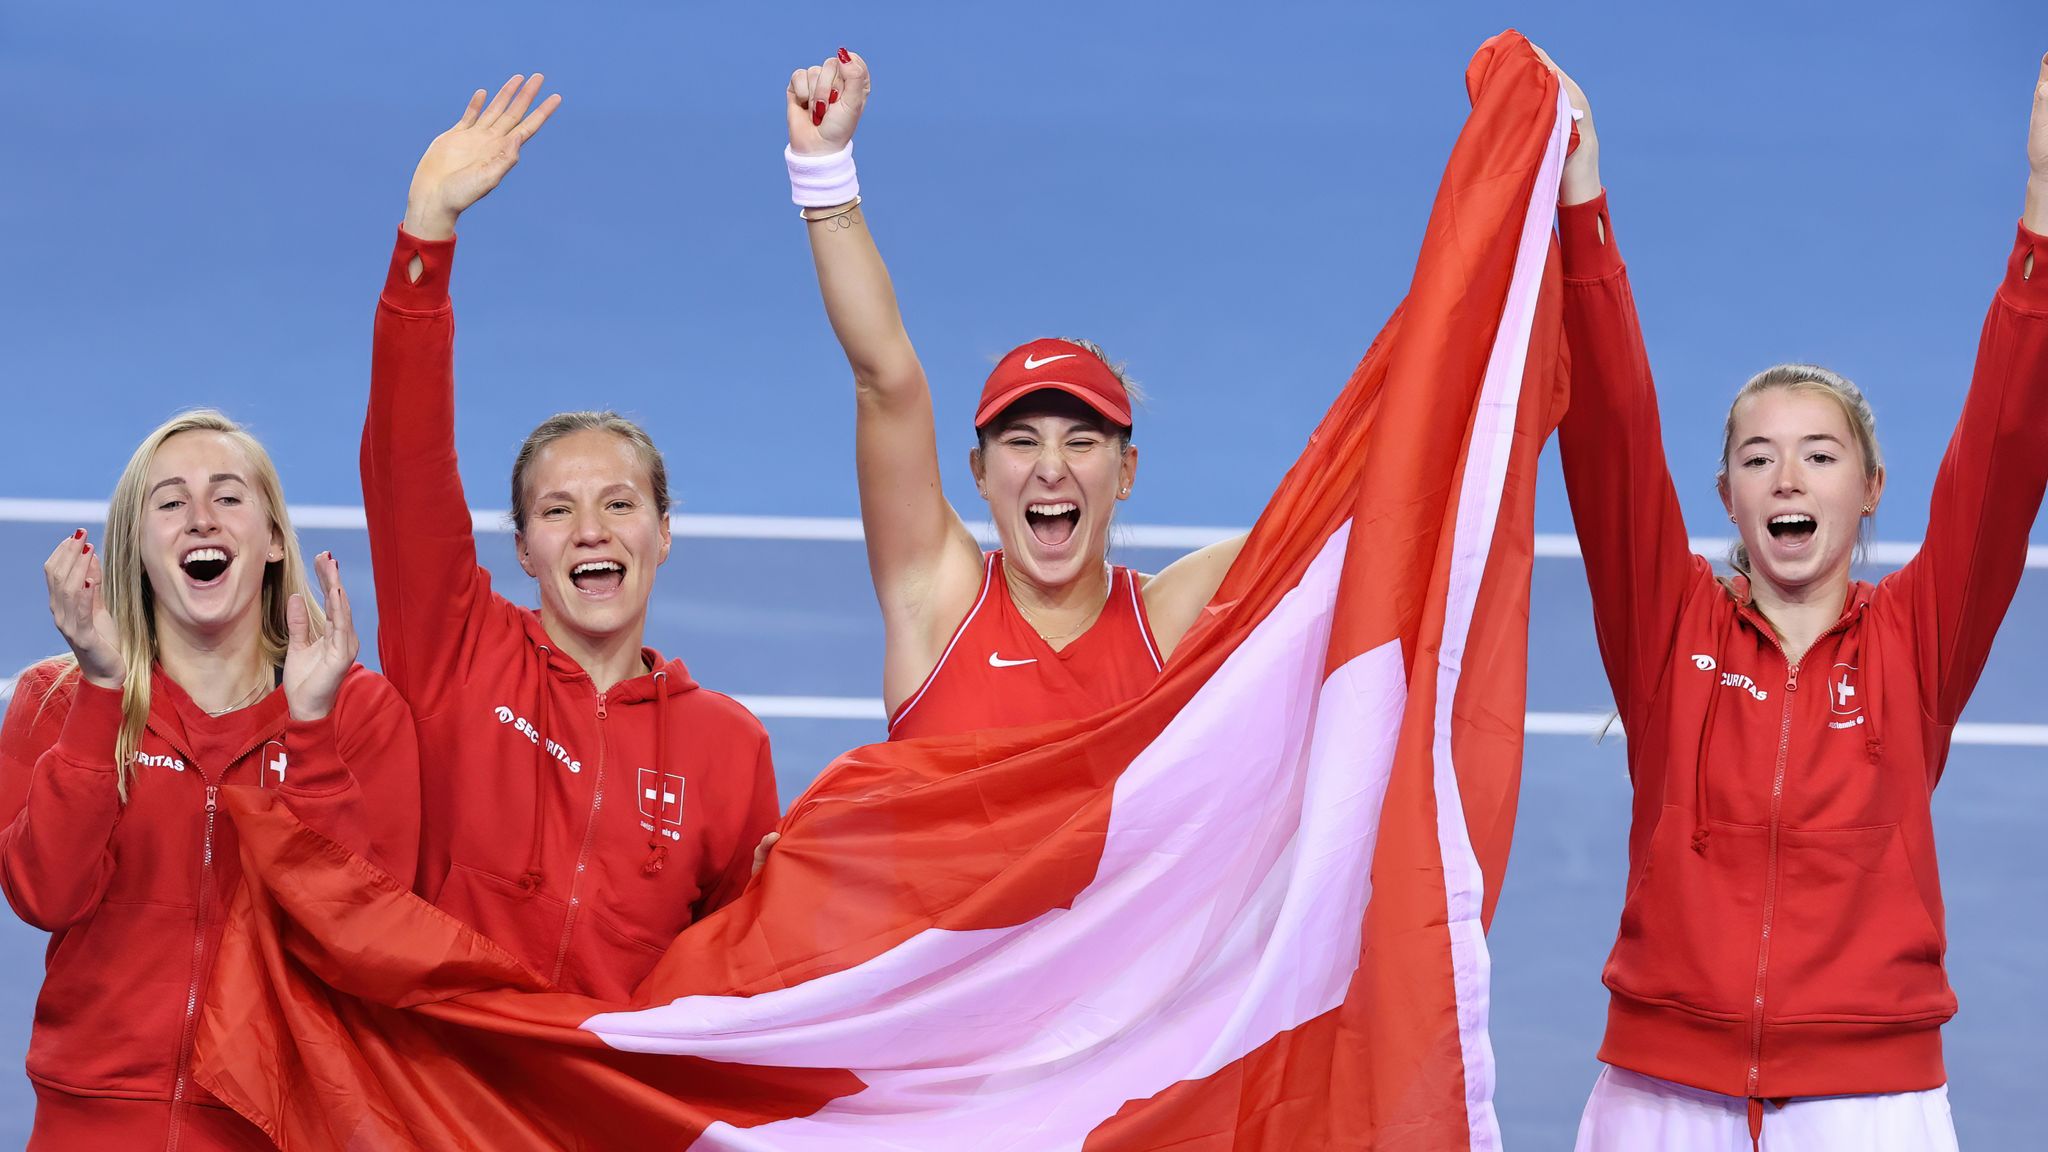 Billie Jean King Cup Belinda Bencic and Jil Teichmann see Switzerland beat Australia and win title for first time Tennis News Sky Sports